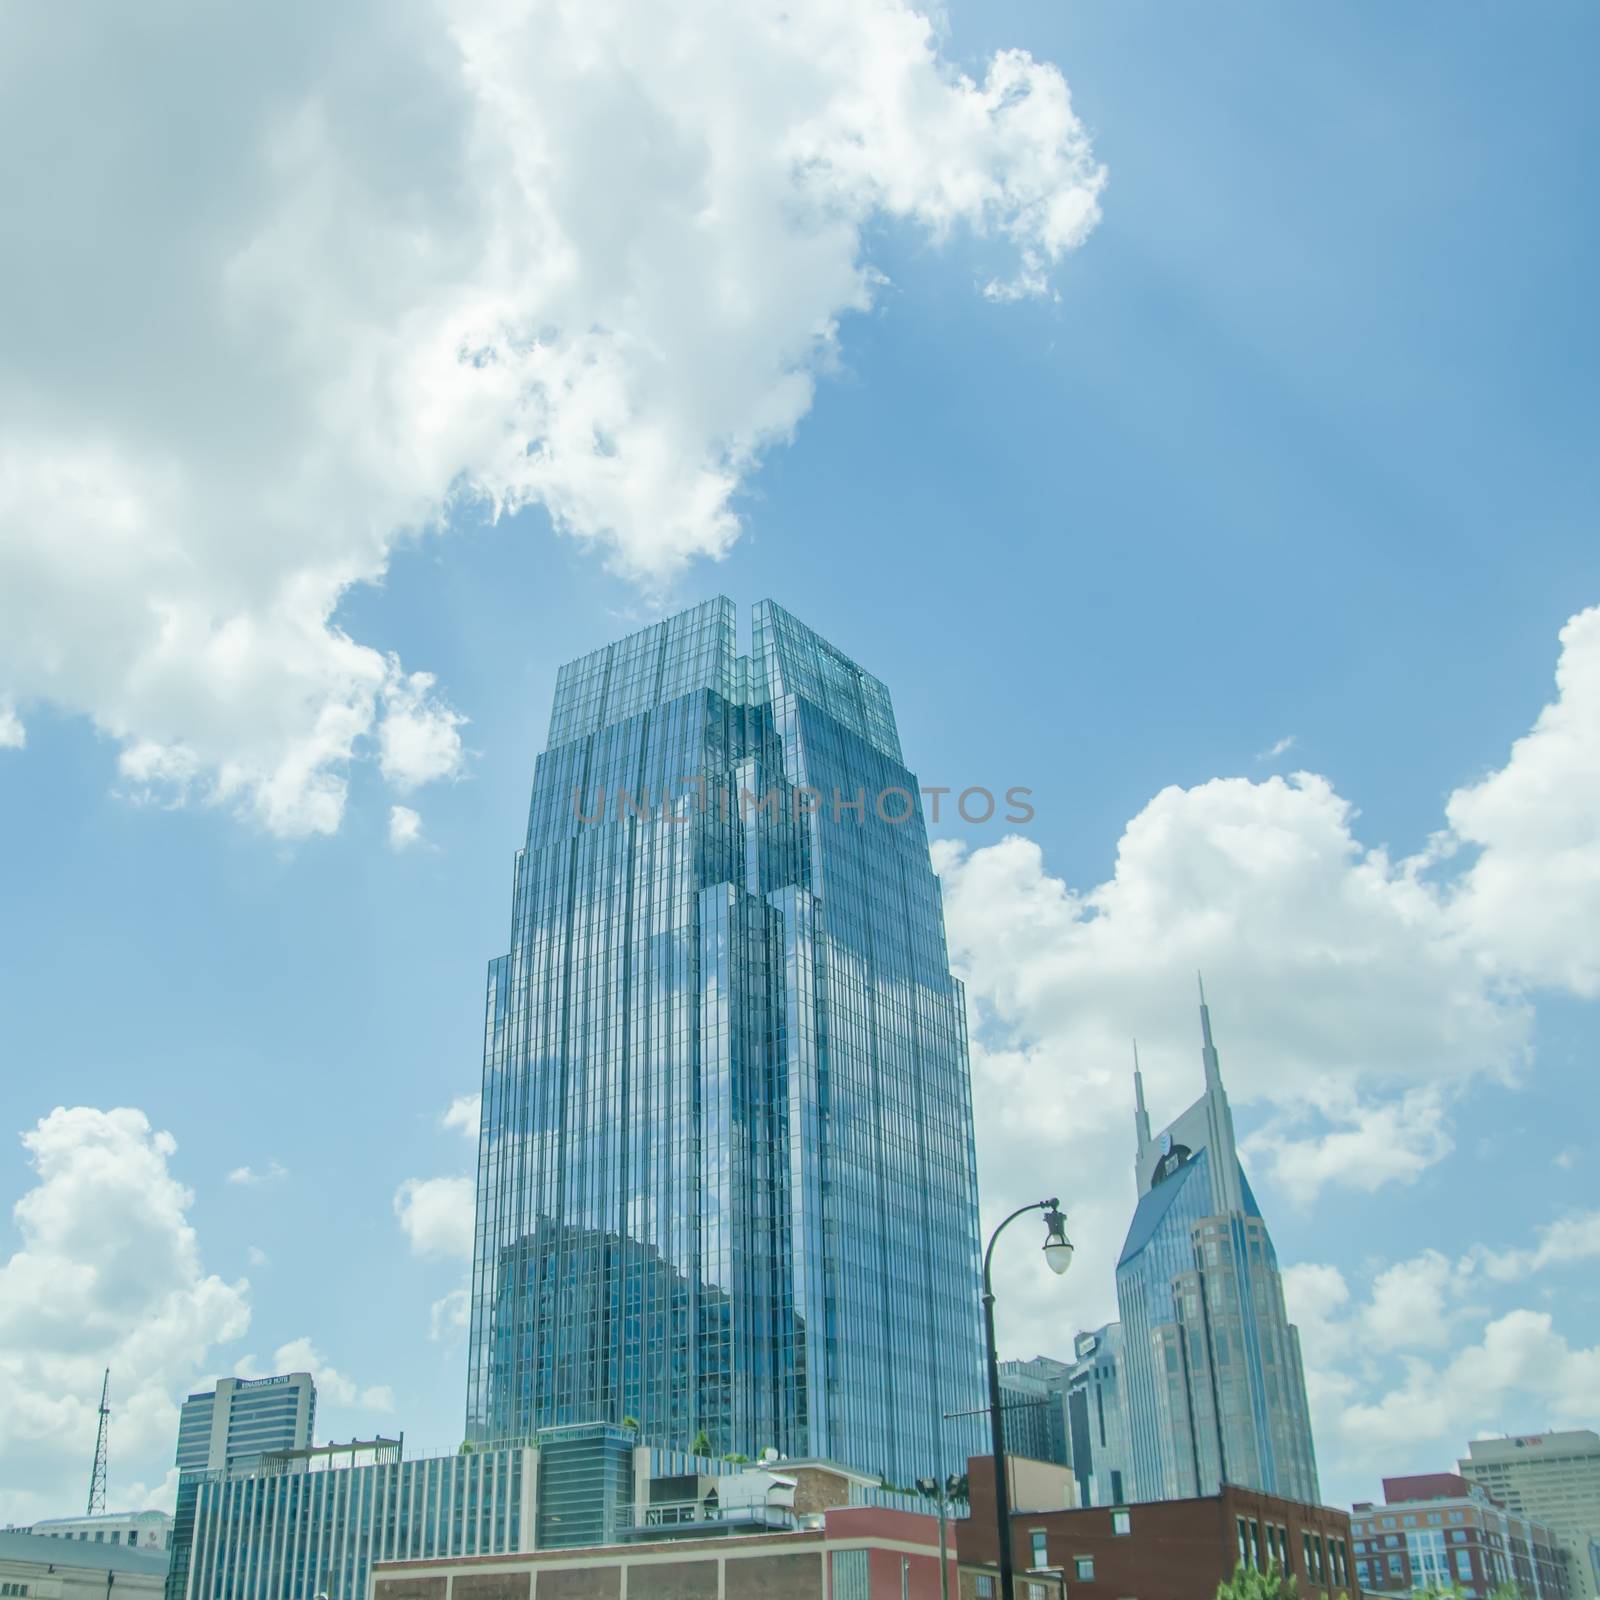 Nashville, Tennessee downtown skyline and streets